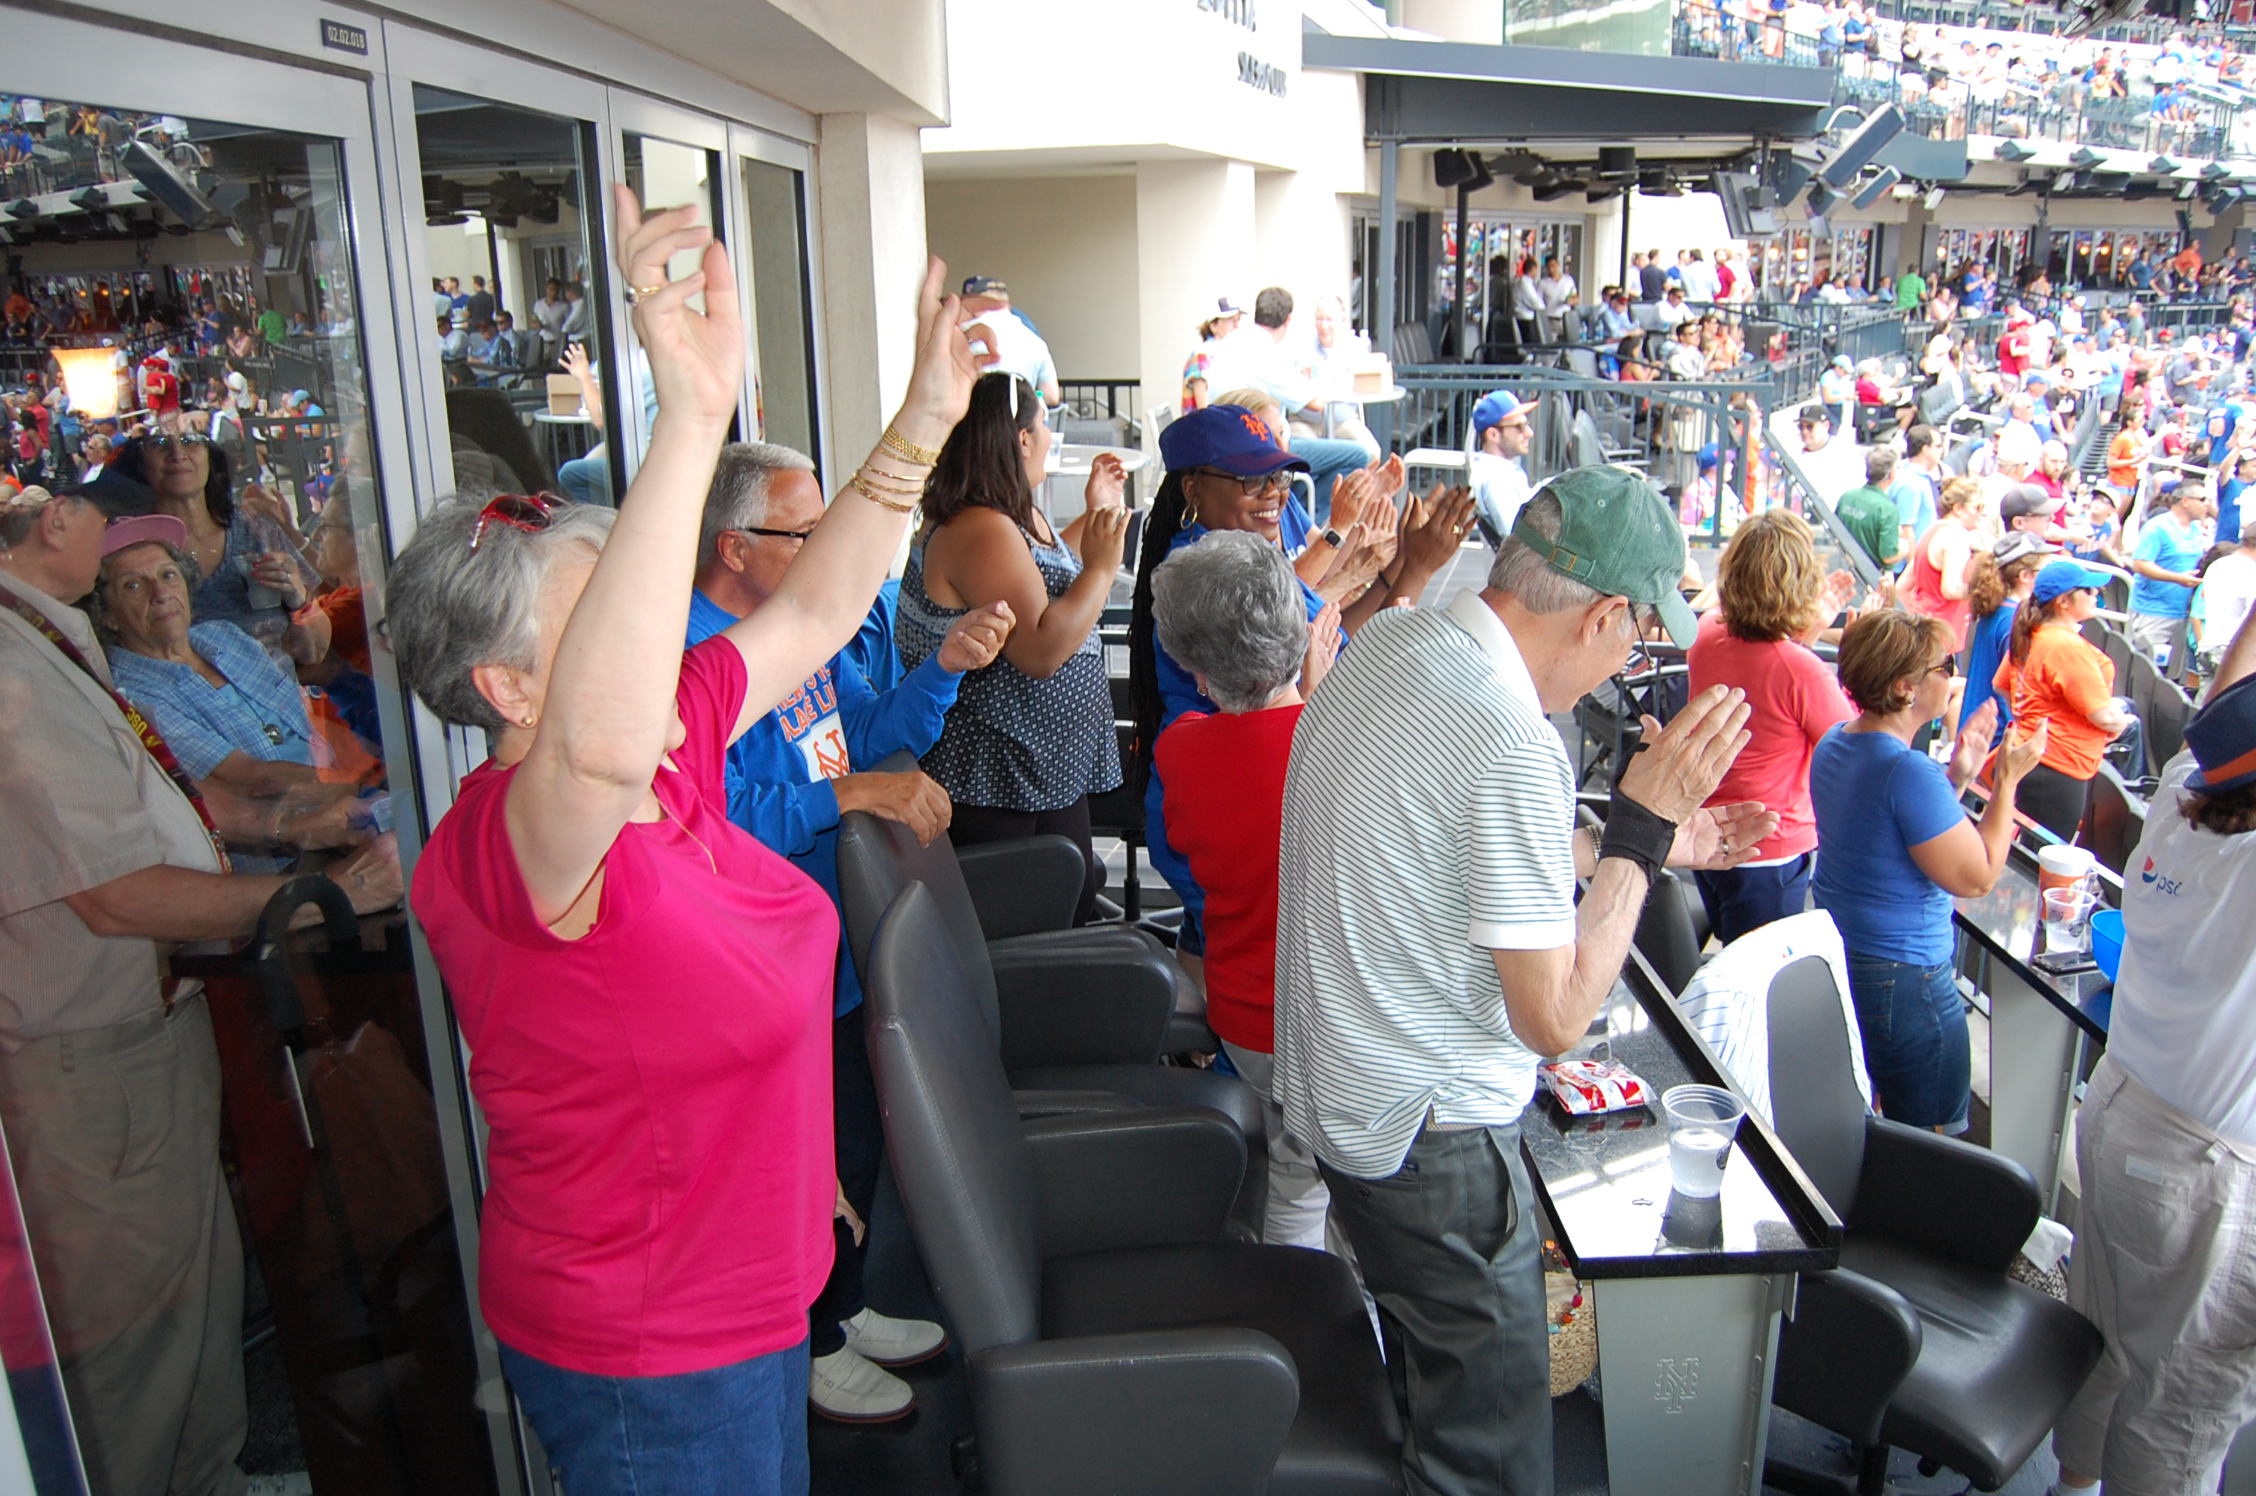 Participants and staff from the River House Adult Care Center in Cos Cobb, Connecticut, cheering on the New York Mets at Citi Field in New York City, as part of the Baseball Reminiscence Program. (Kenneth Best/UConn Photo)